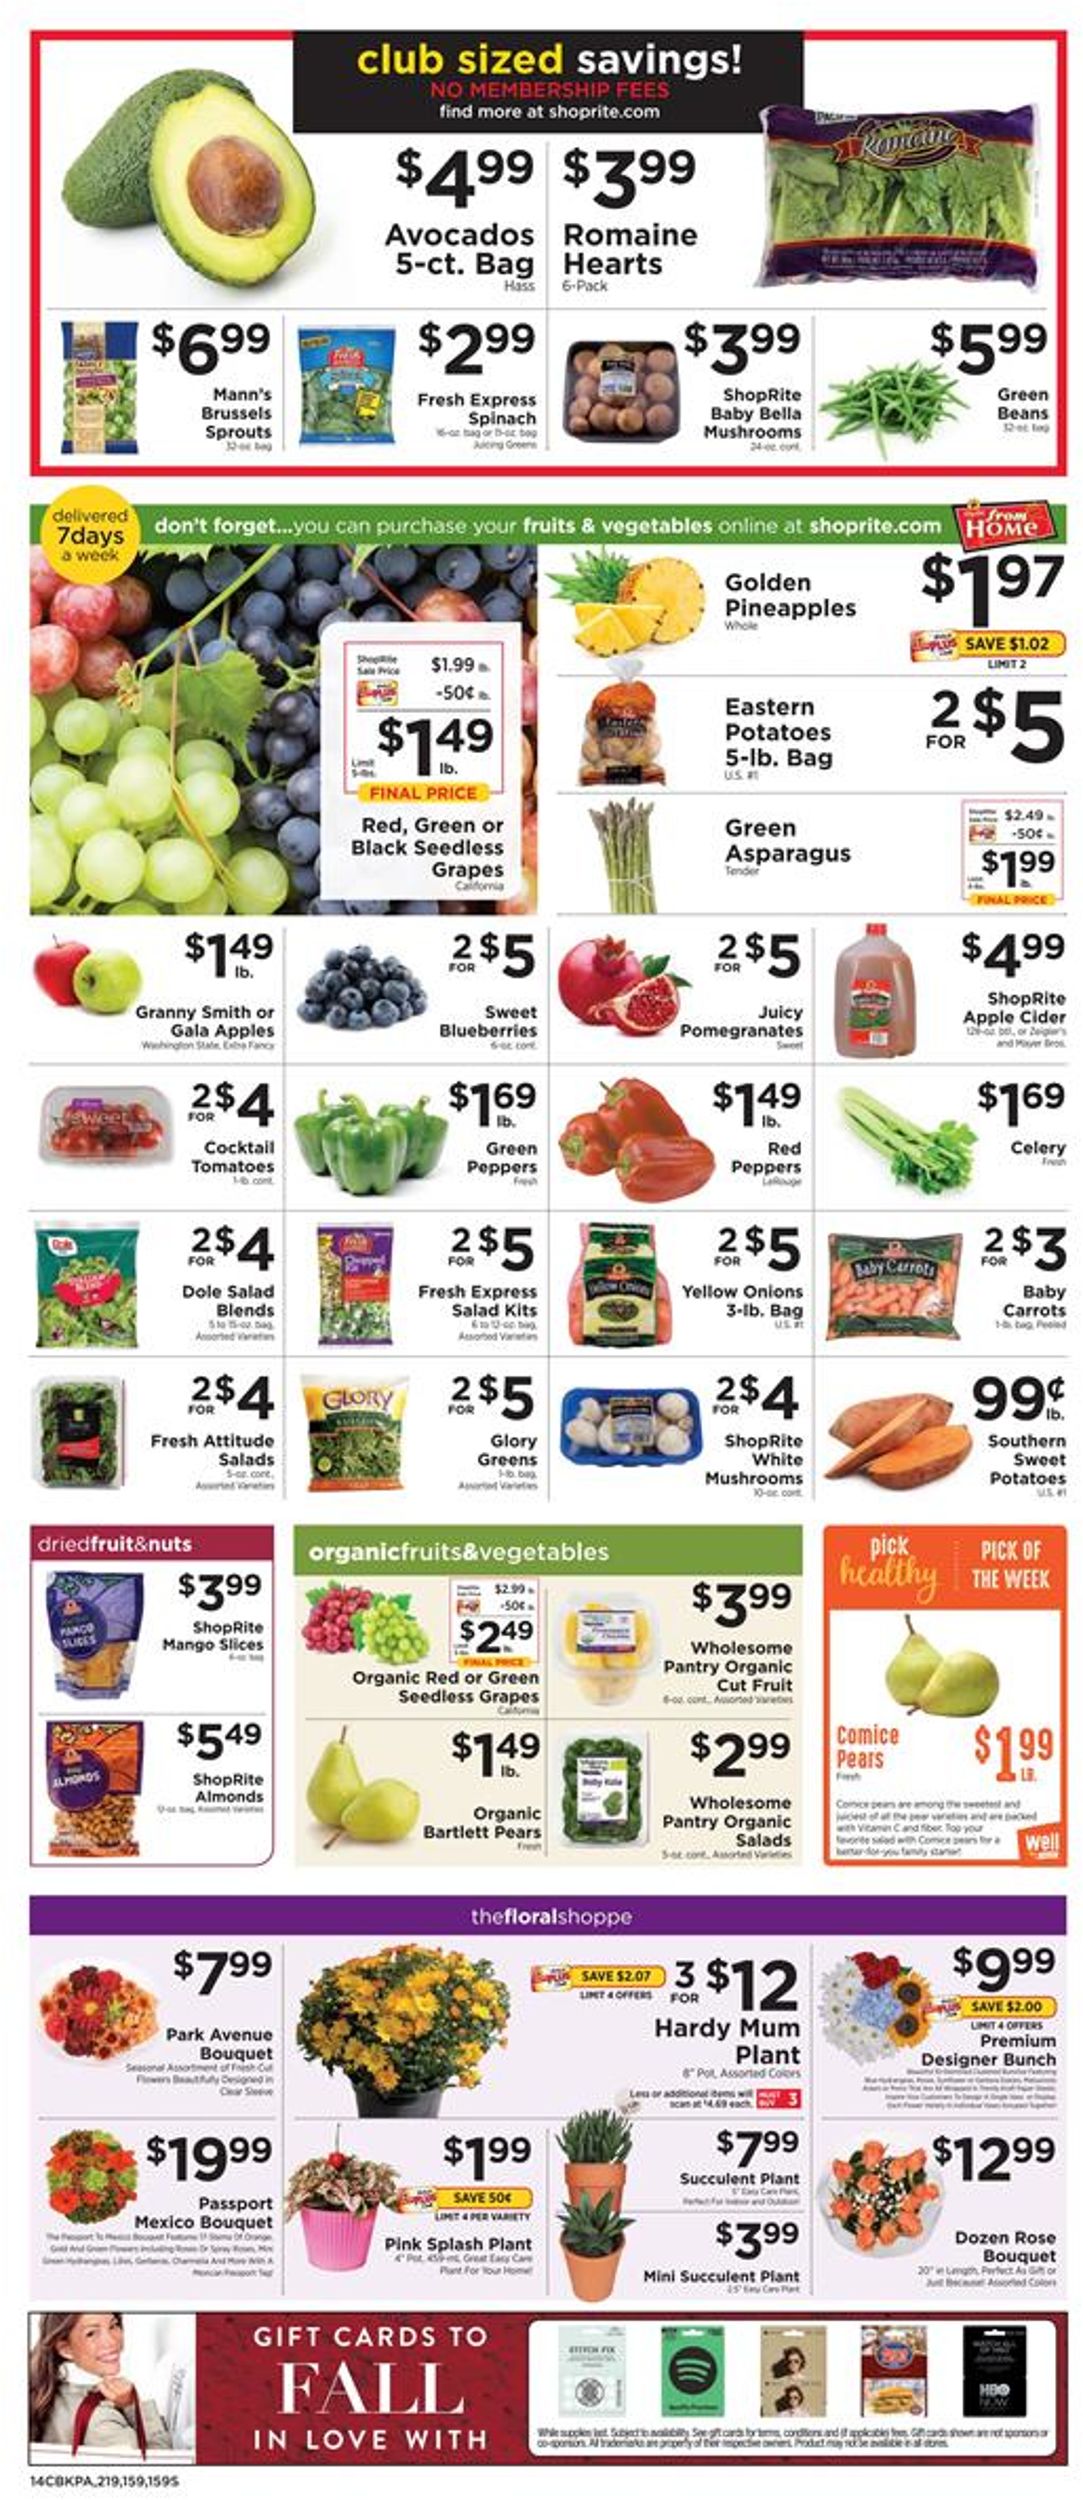 ShopRite Current weekly ad 09/29 - 10/05/2019 [14] - frequent-ads.com